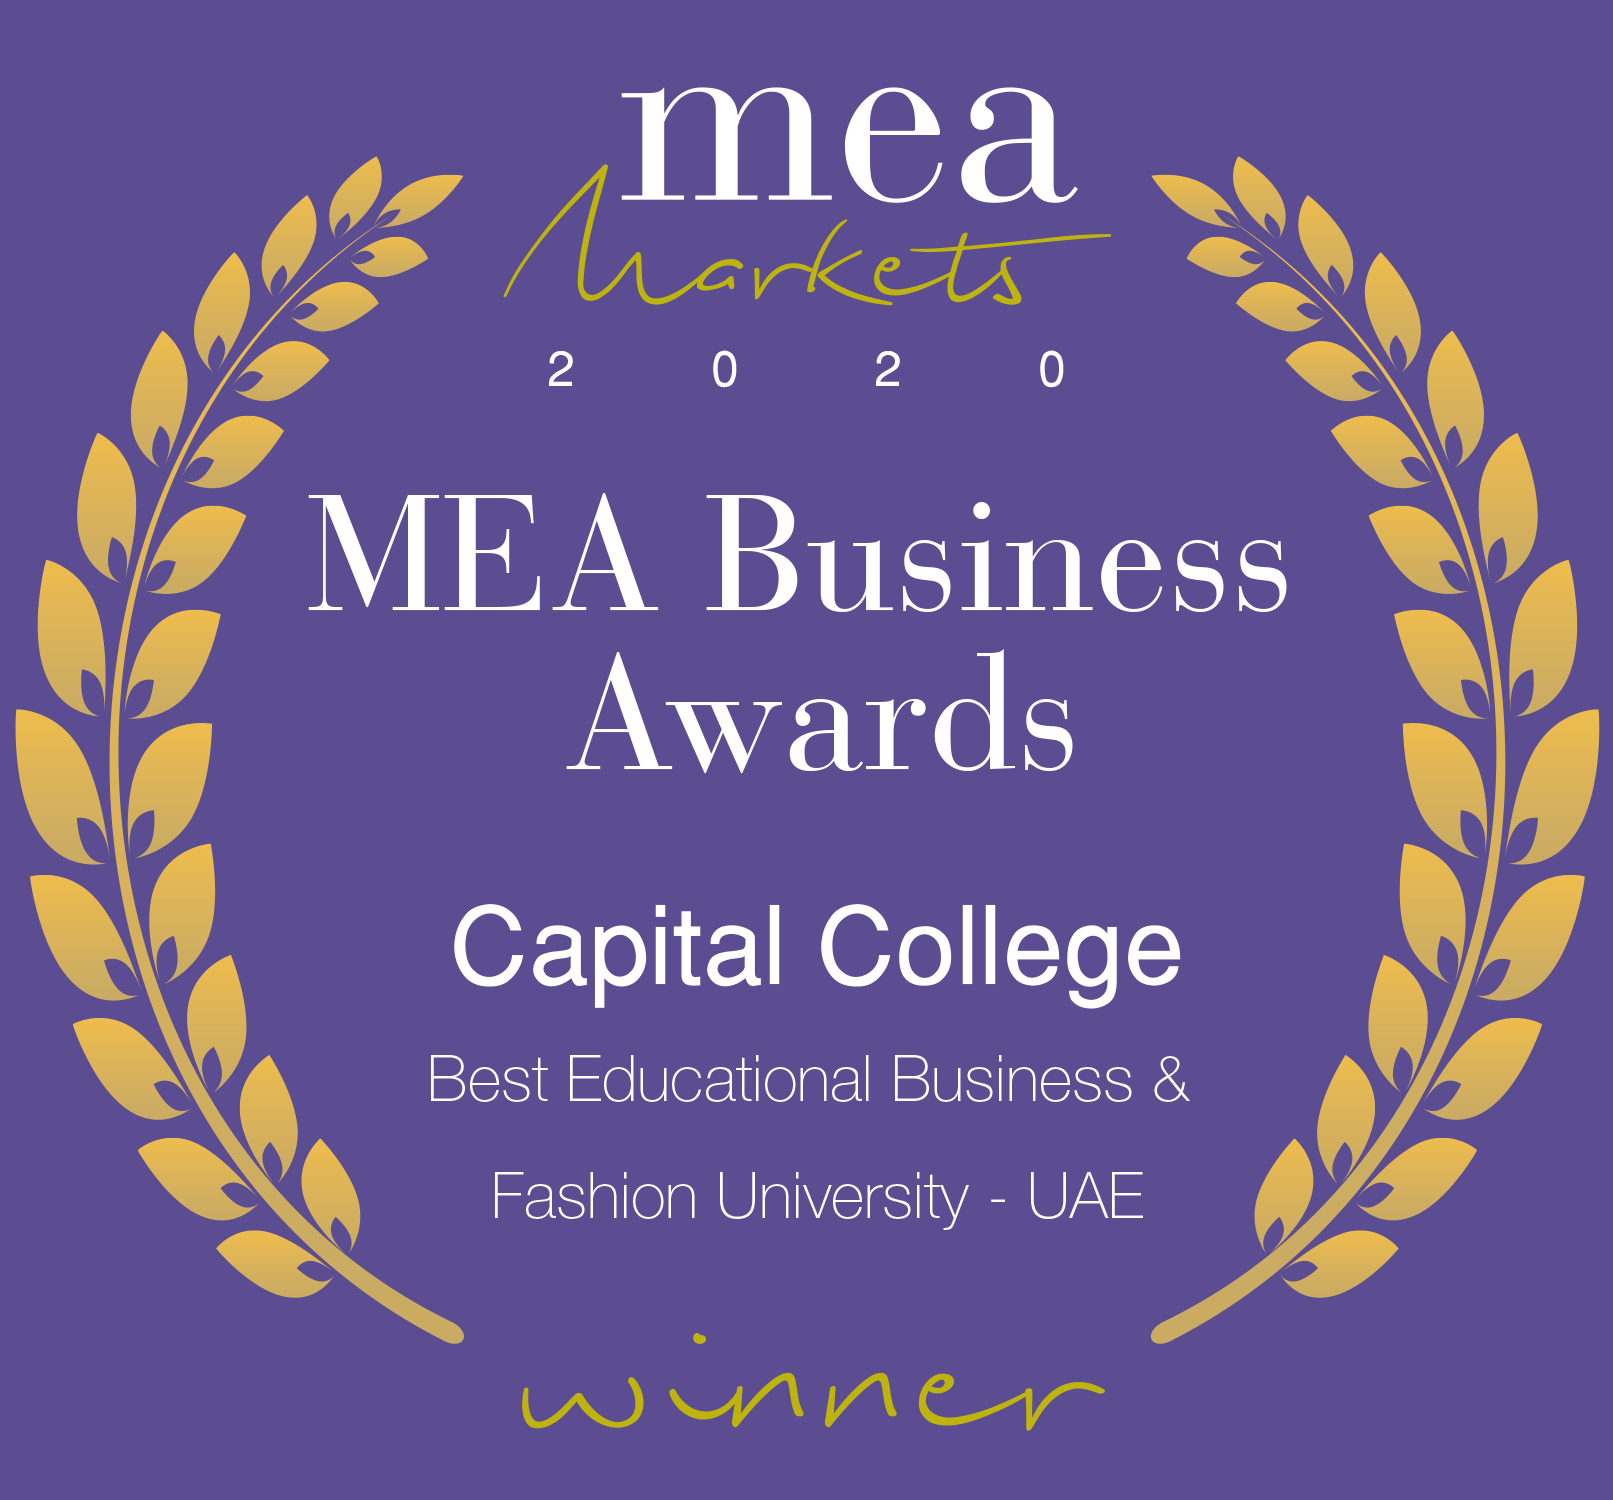 Best Educational Business and Fashion University of the year